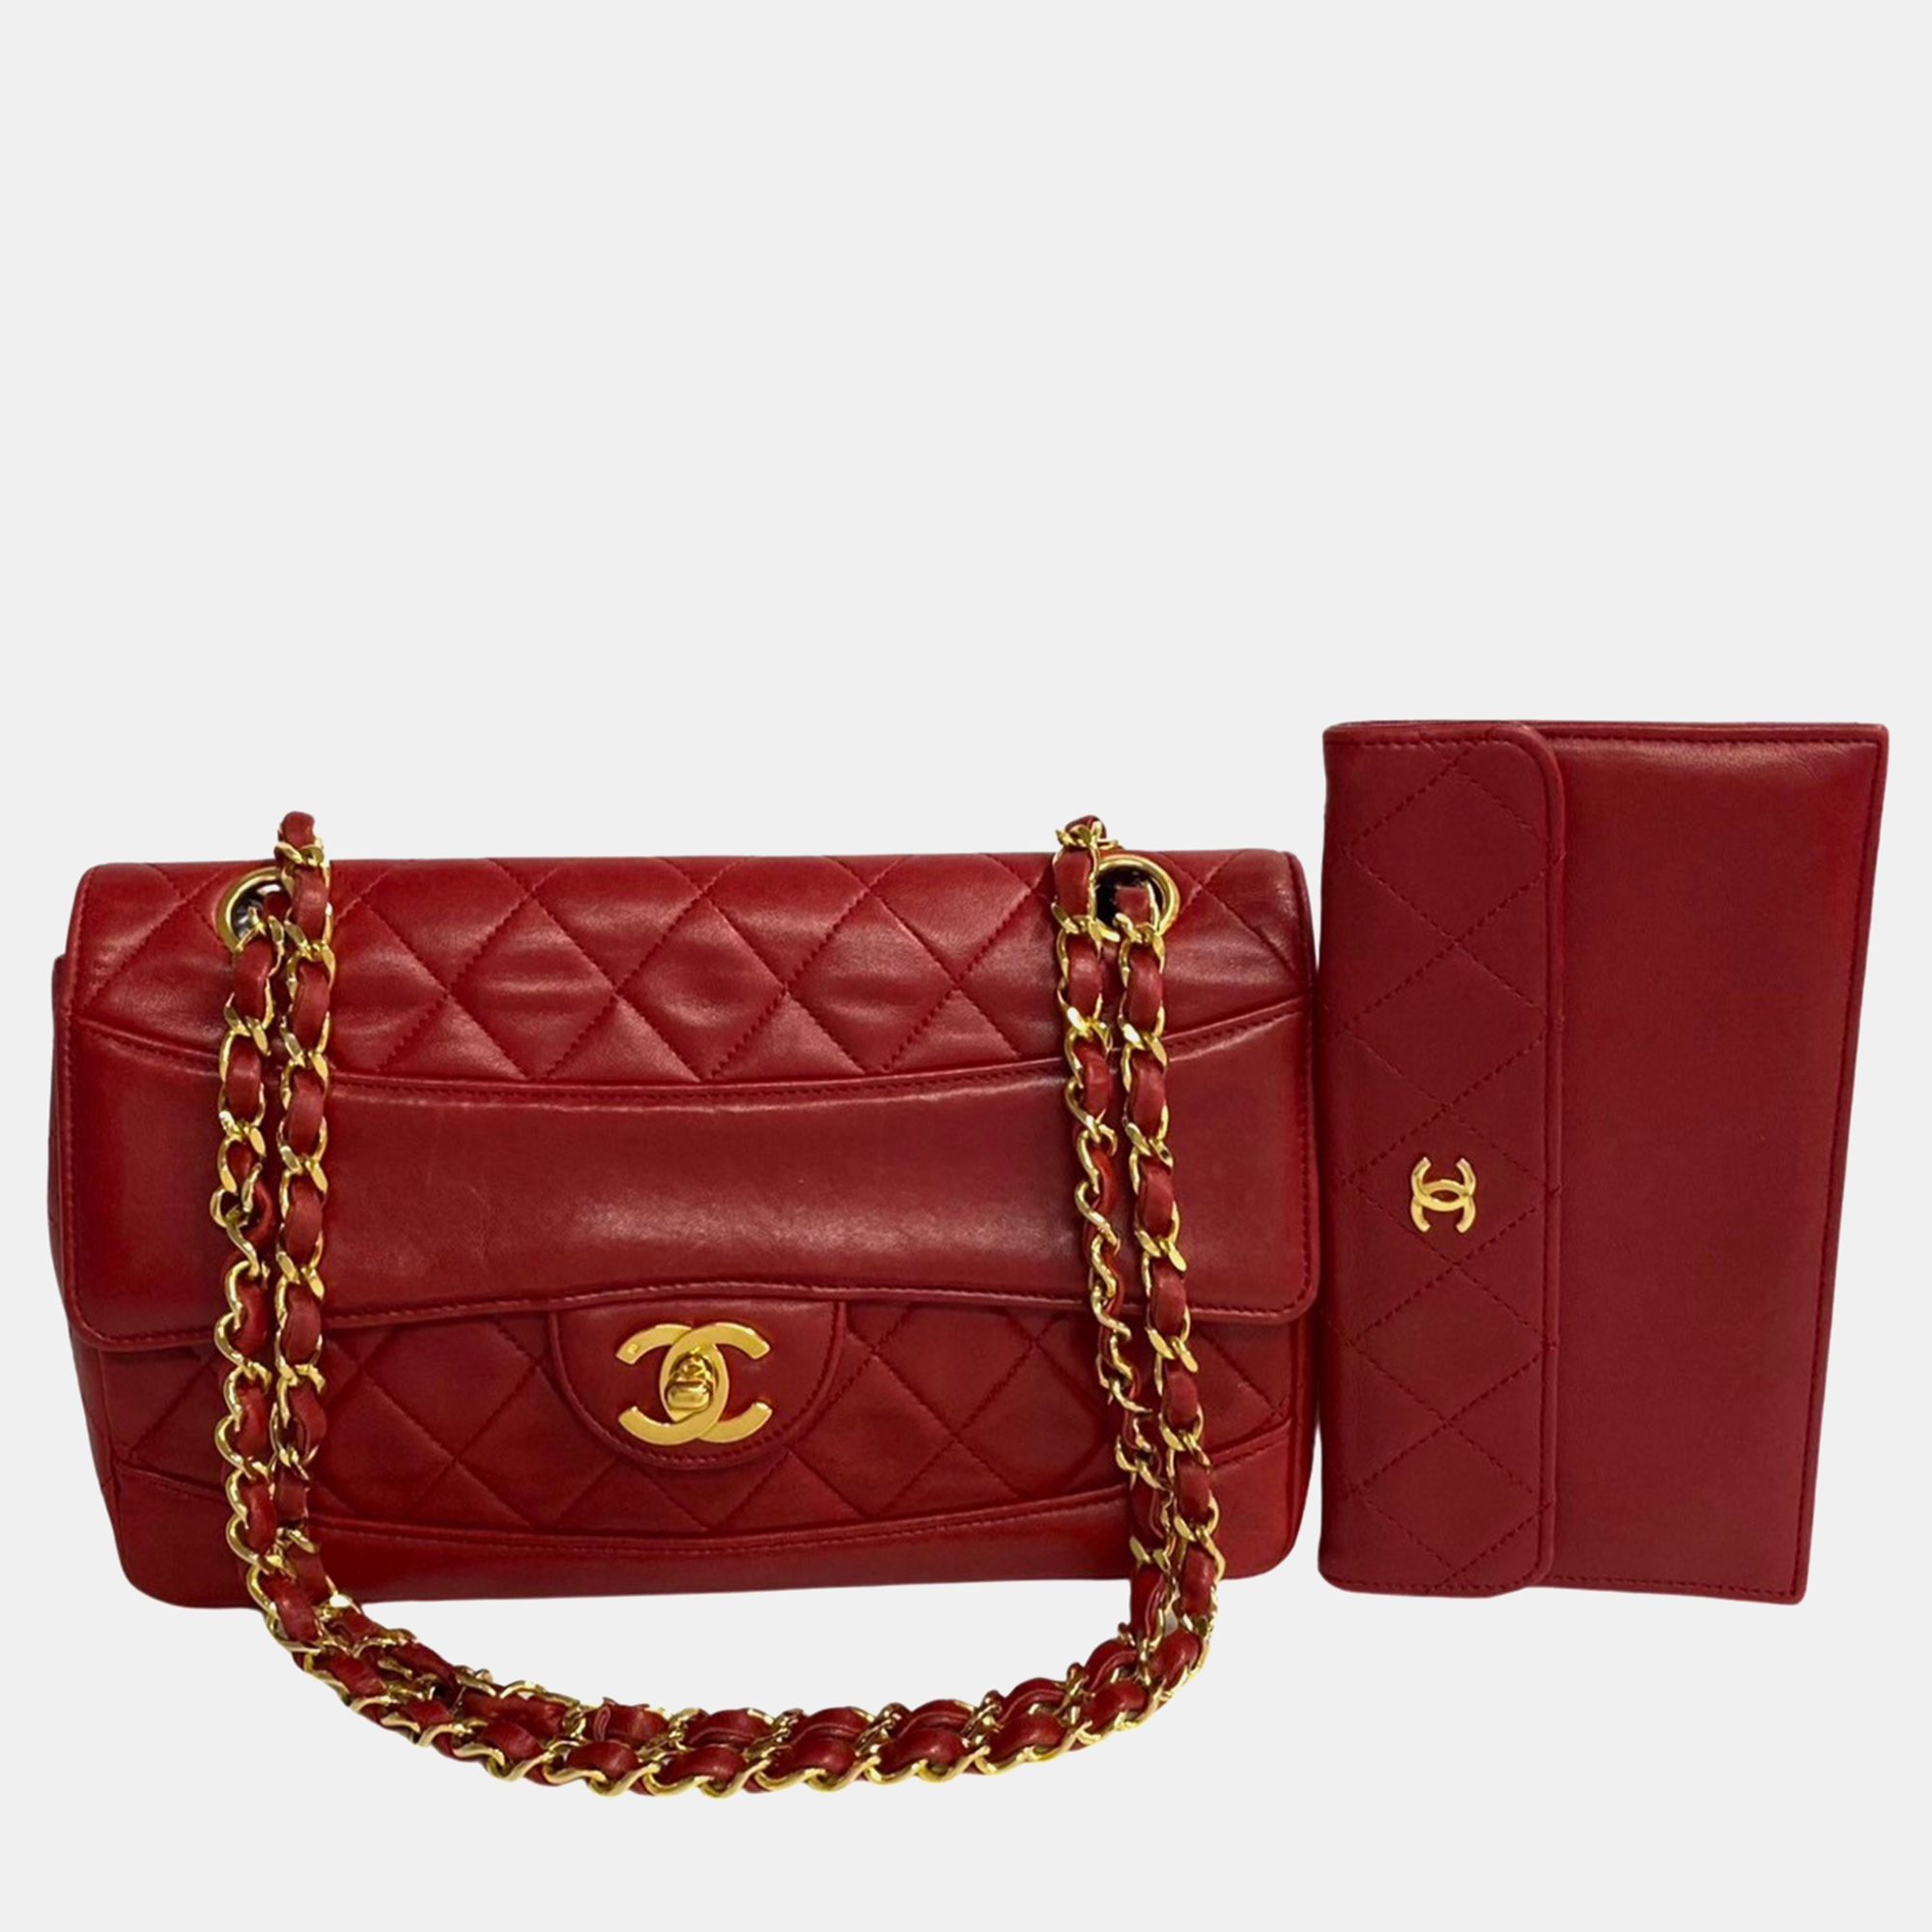 

Chanel Red Leather CC Quilted Flap Bag